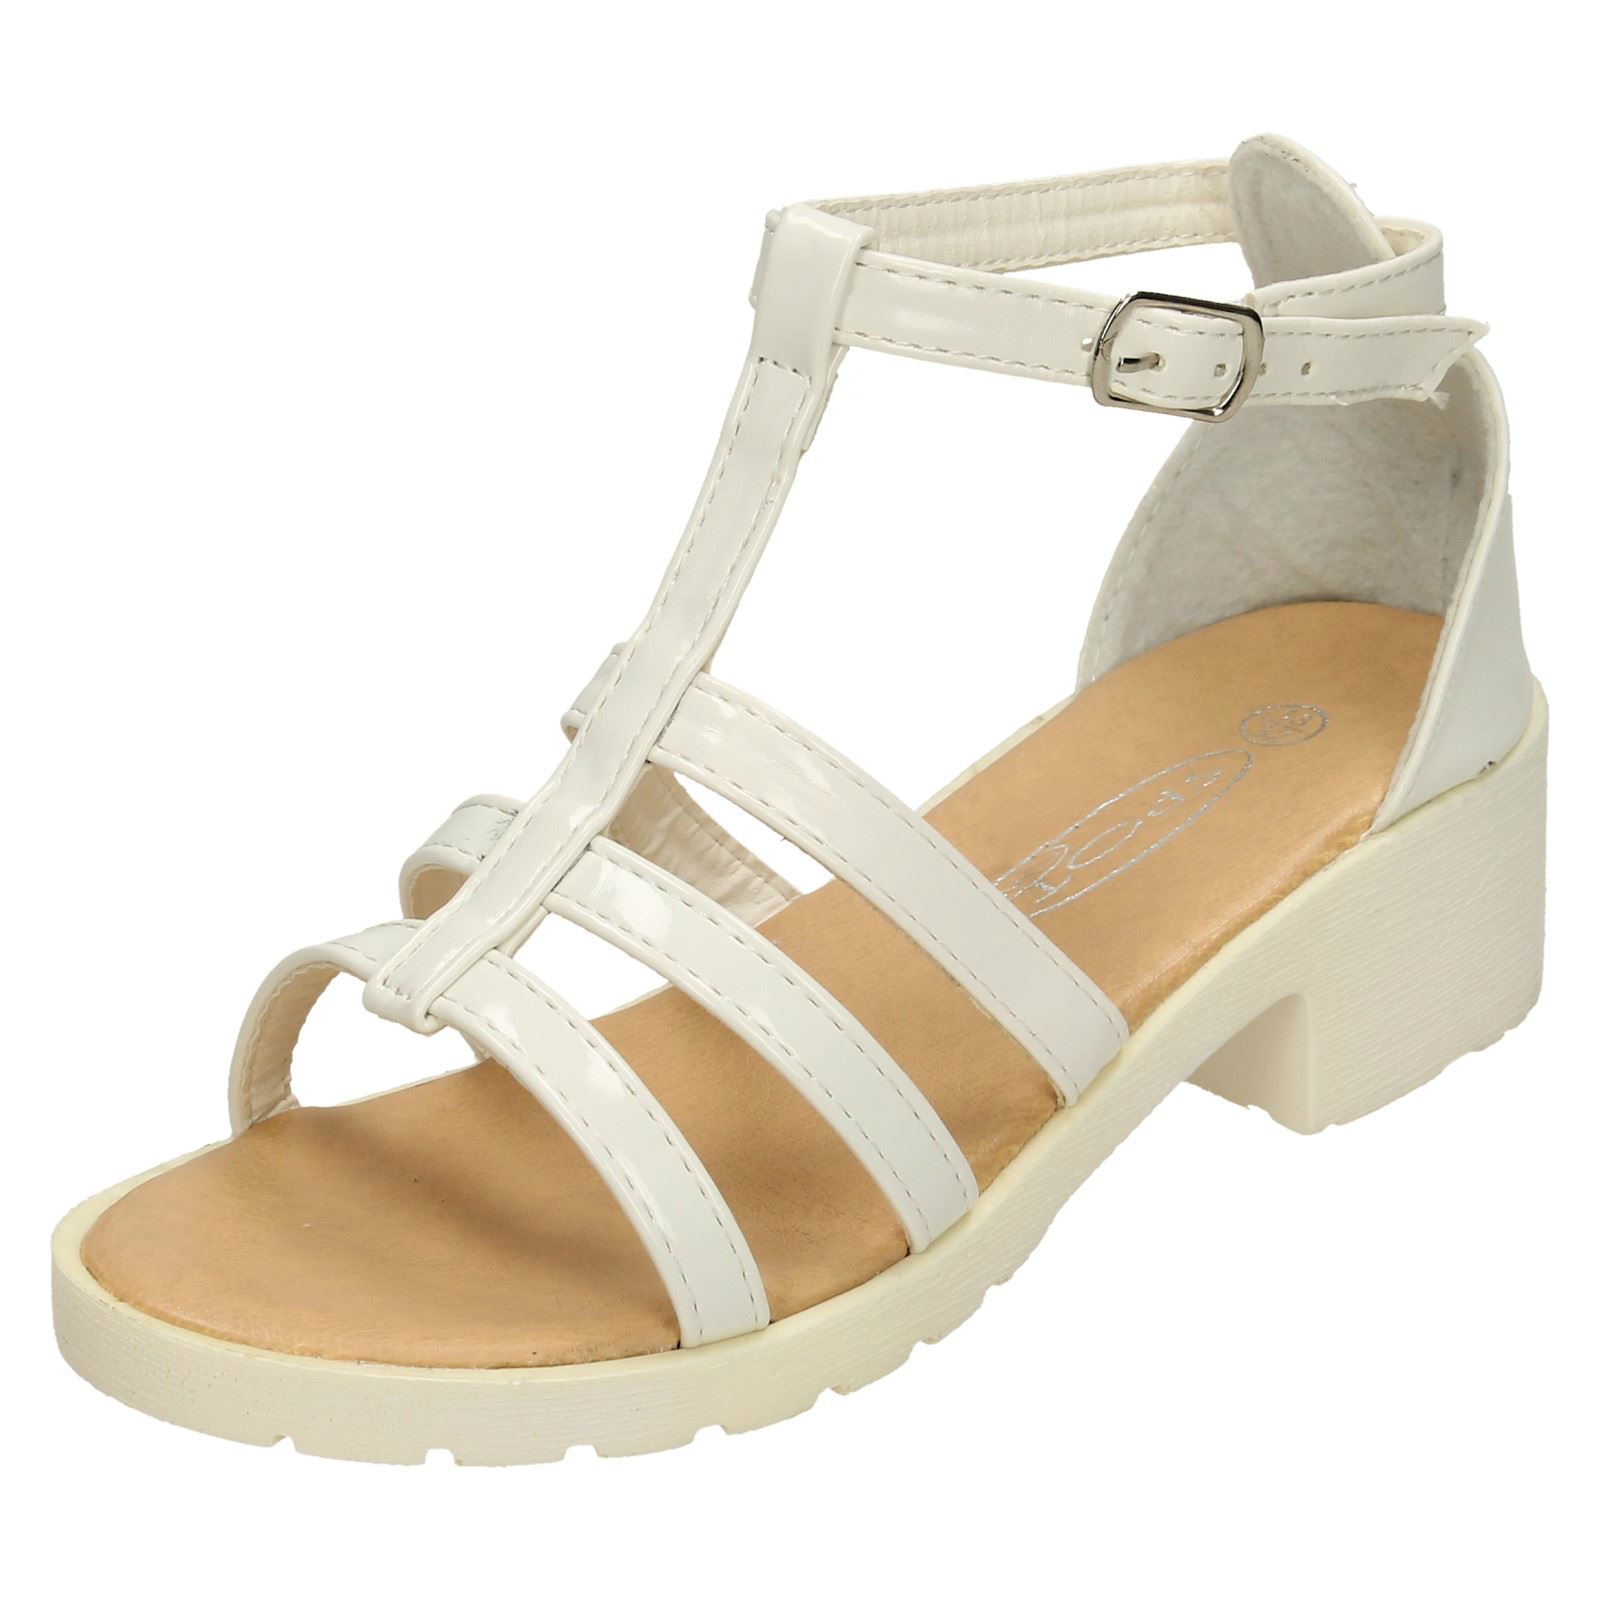 GIRLS WHITE GLADIATOR SANDALS STRAPPY KIDS OPEN-TOE HOLIDAY SHOES SIZES ...